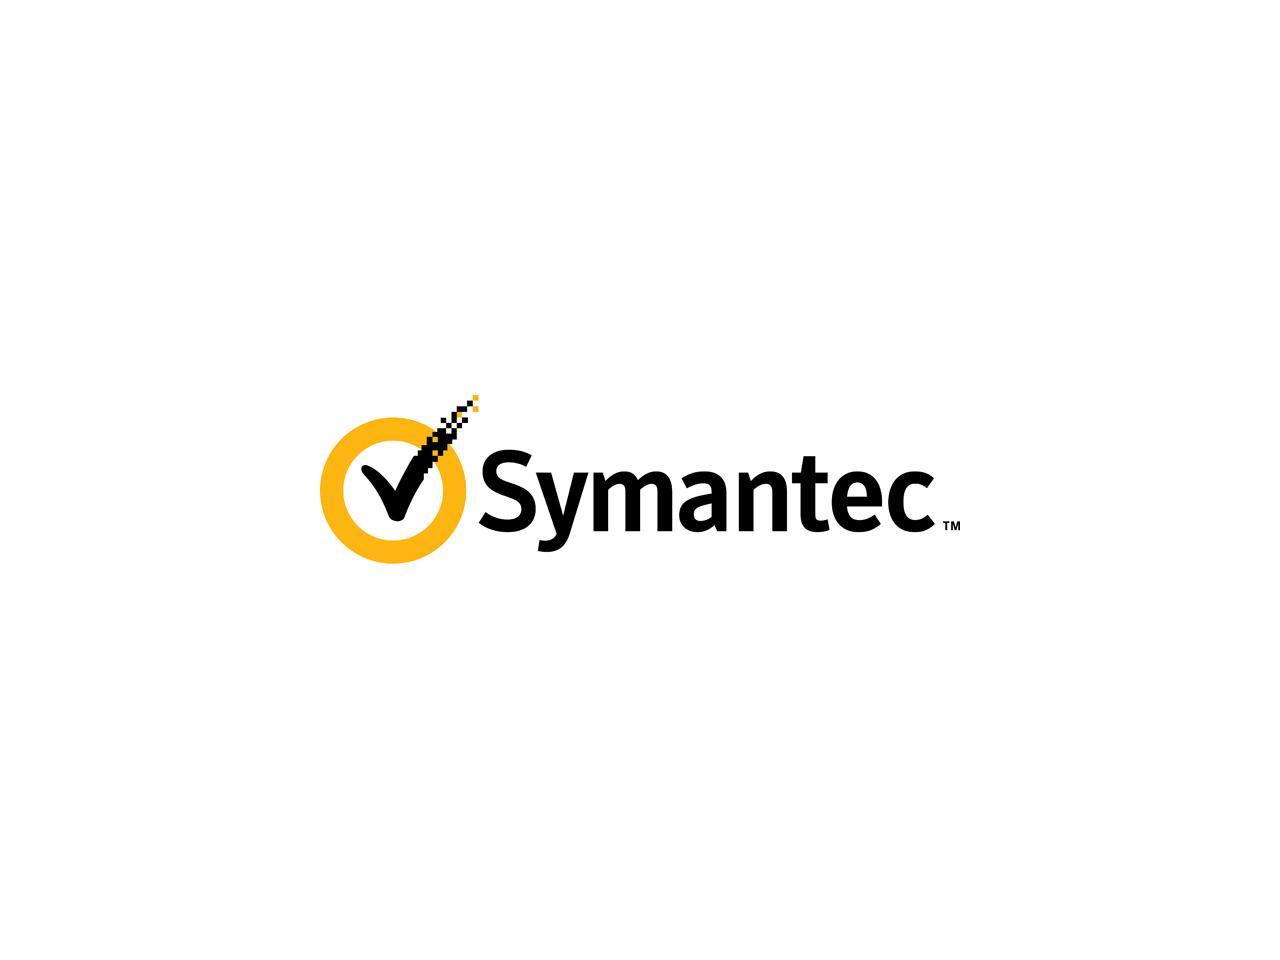 symantec endpoint protection license is missing